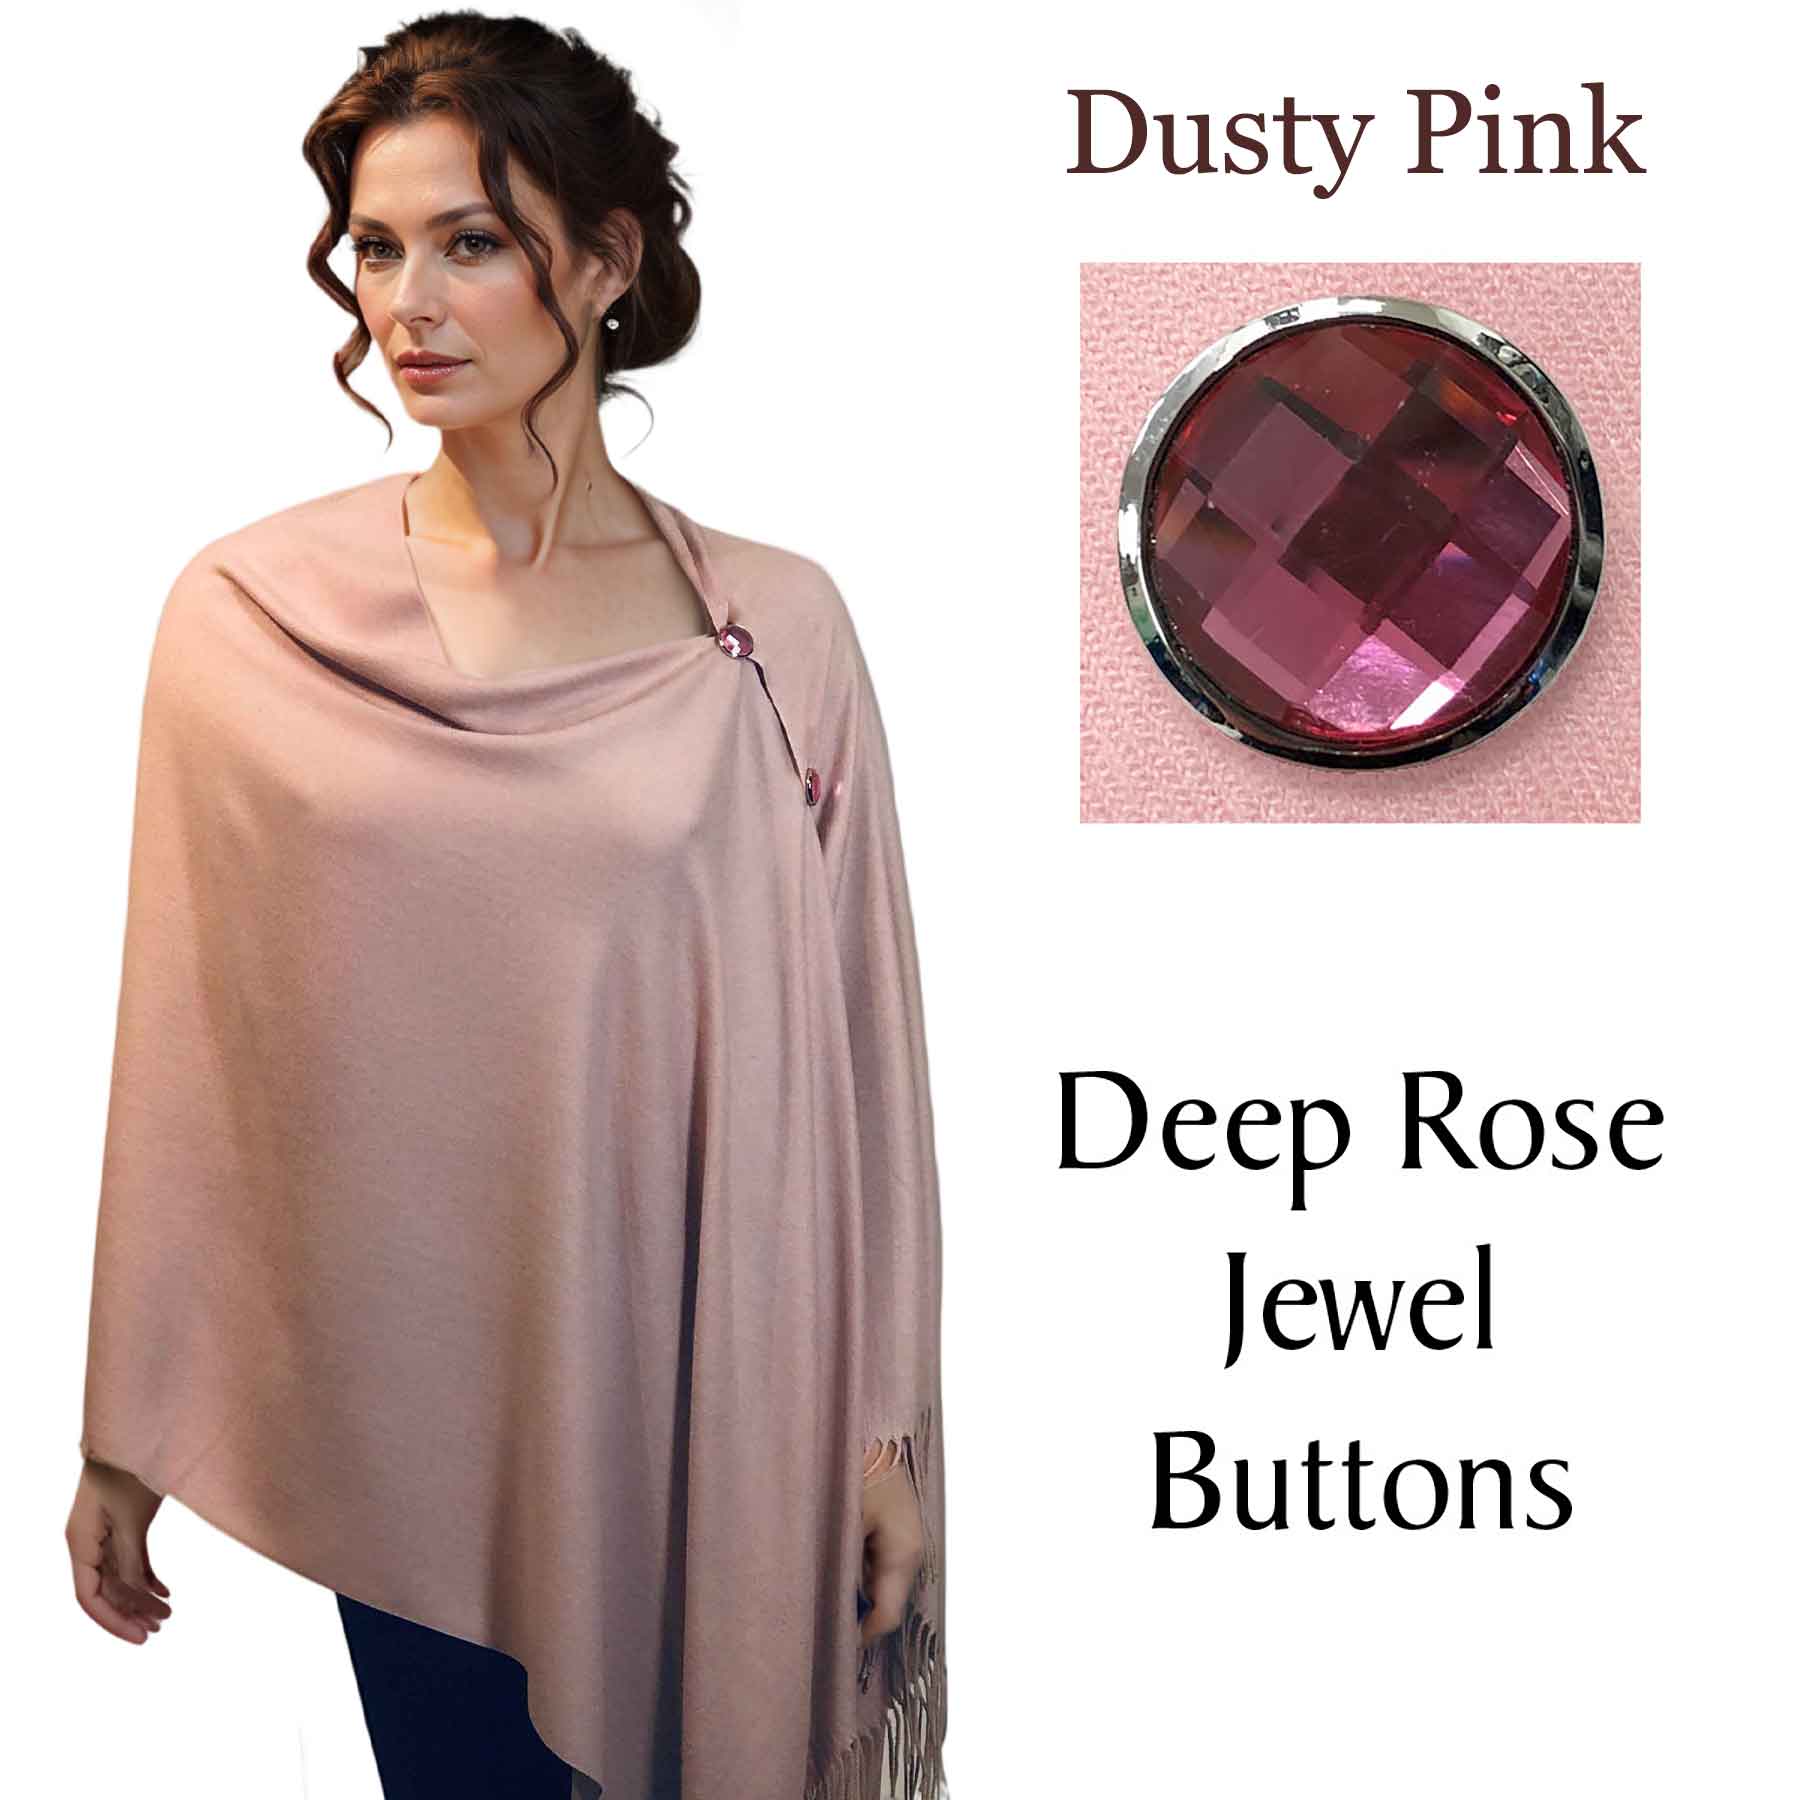 #20 Dusty Pink with Deep Rose Jewel Buttons